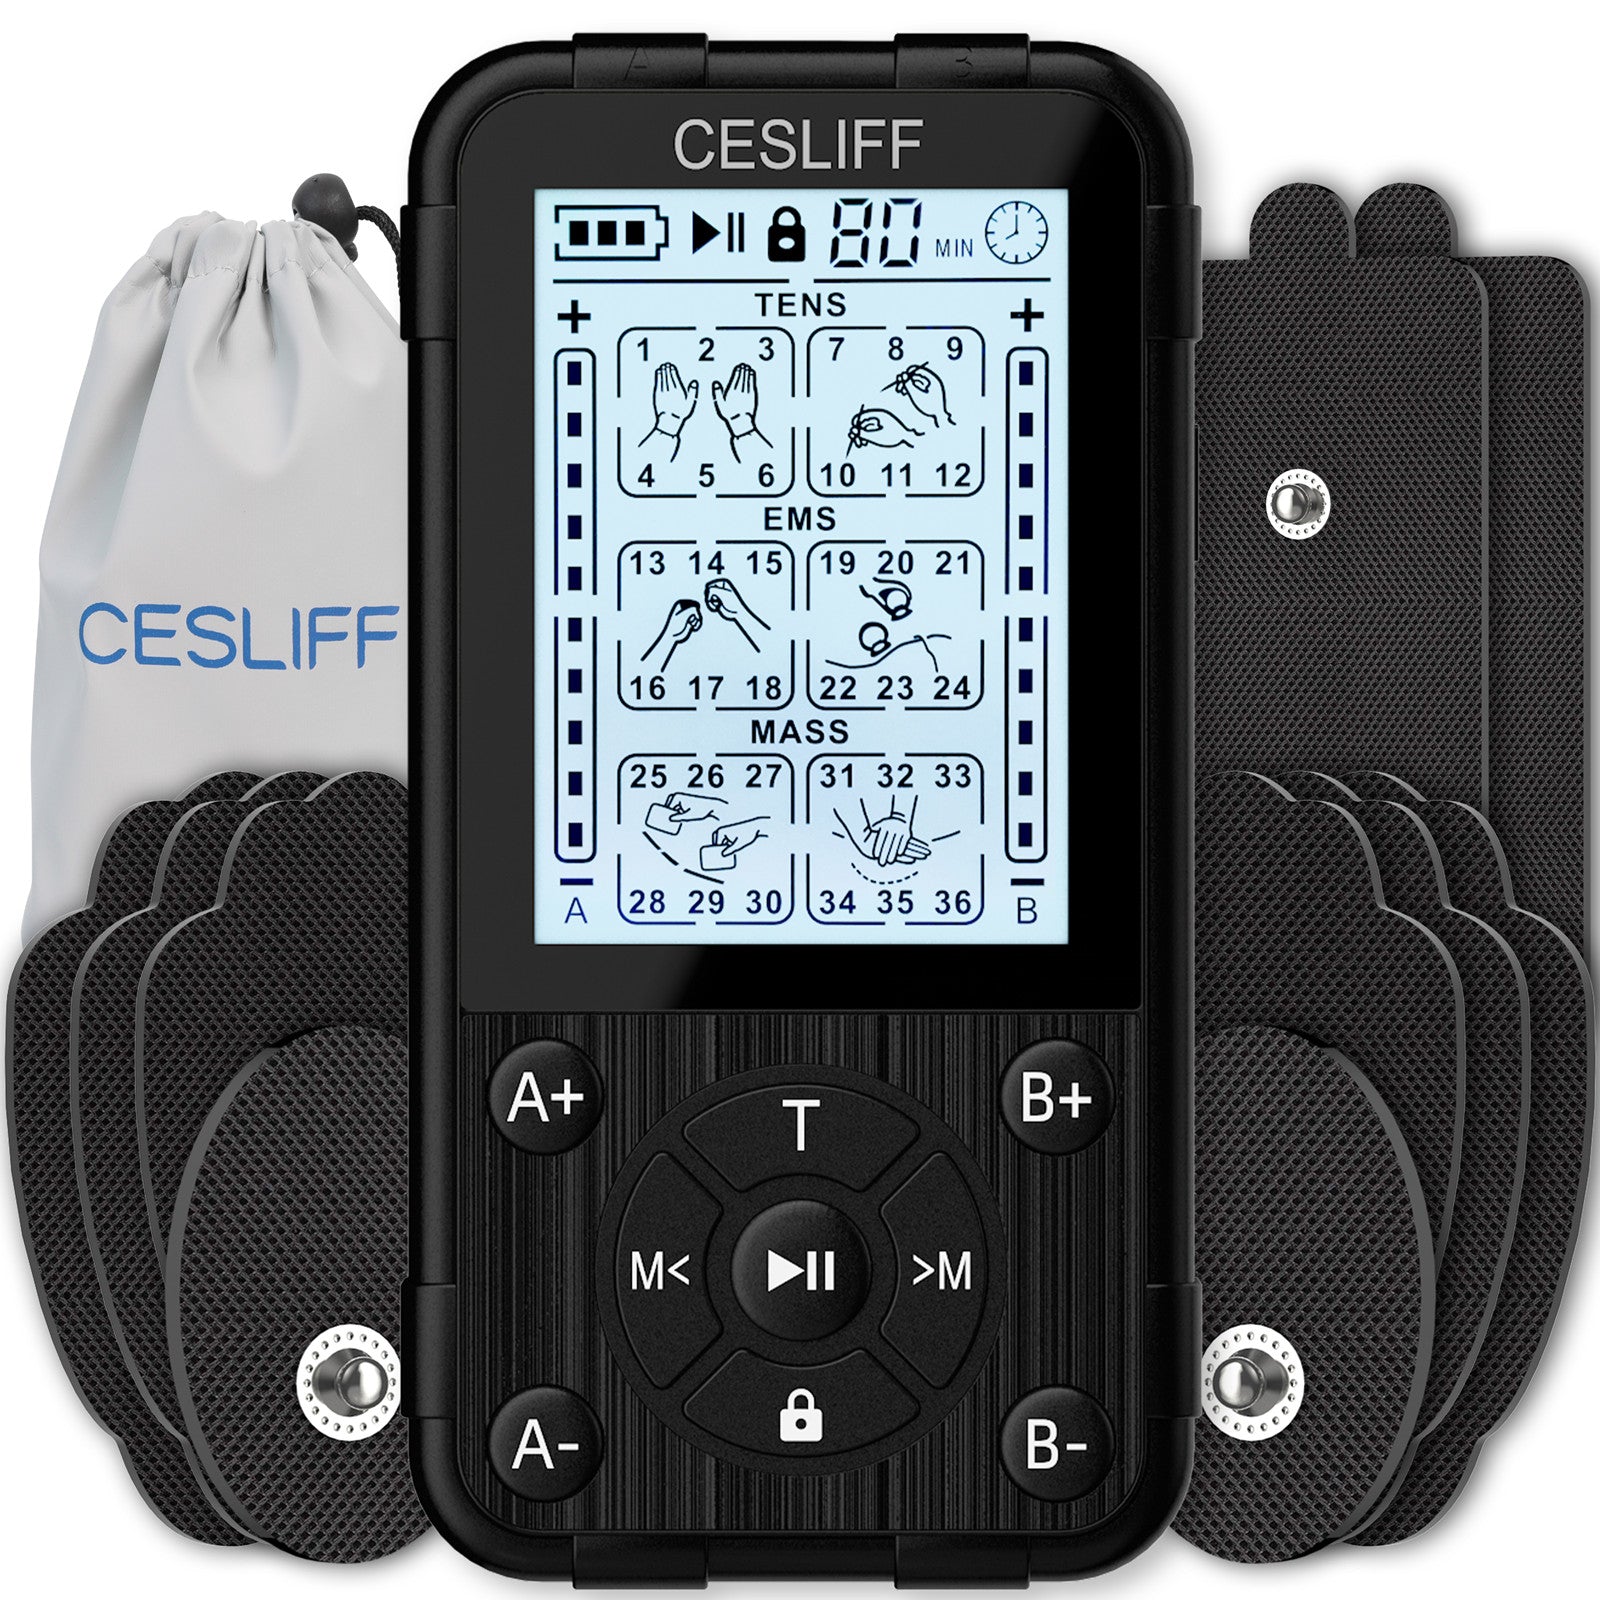 Wireless TENS Unit Muscle Stimulator for Pain Relief Therapy